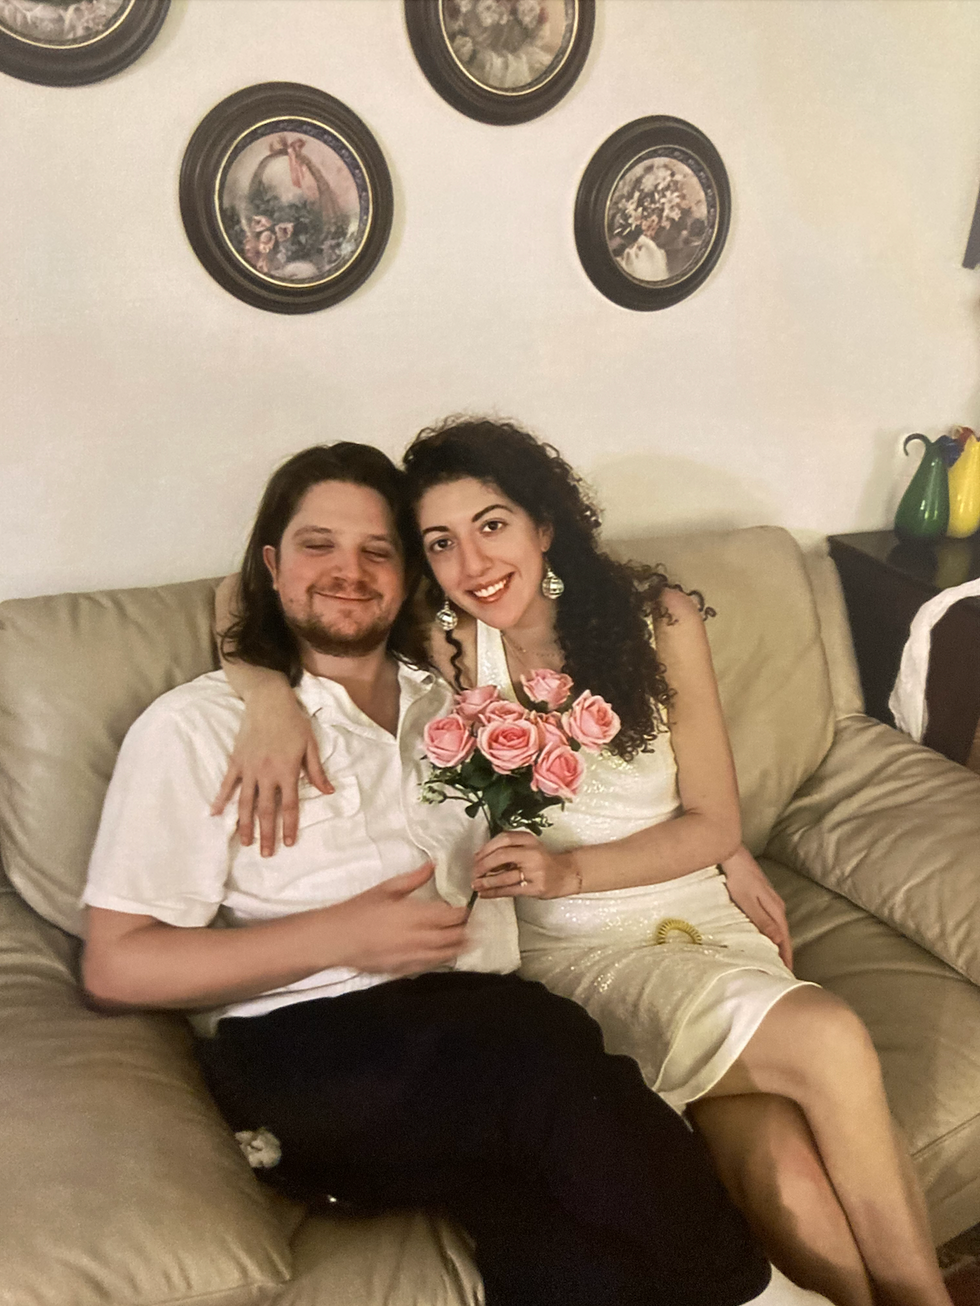 man and woman in wedding clothes sitting on a sofa